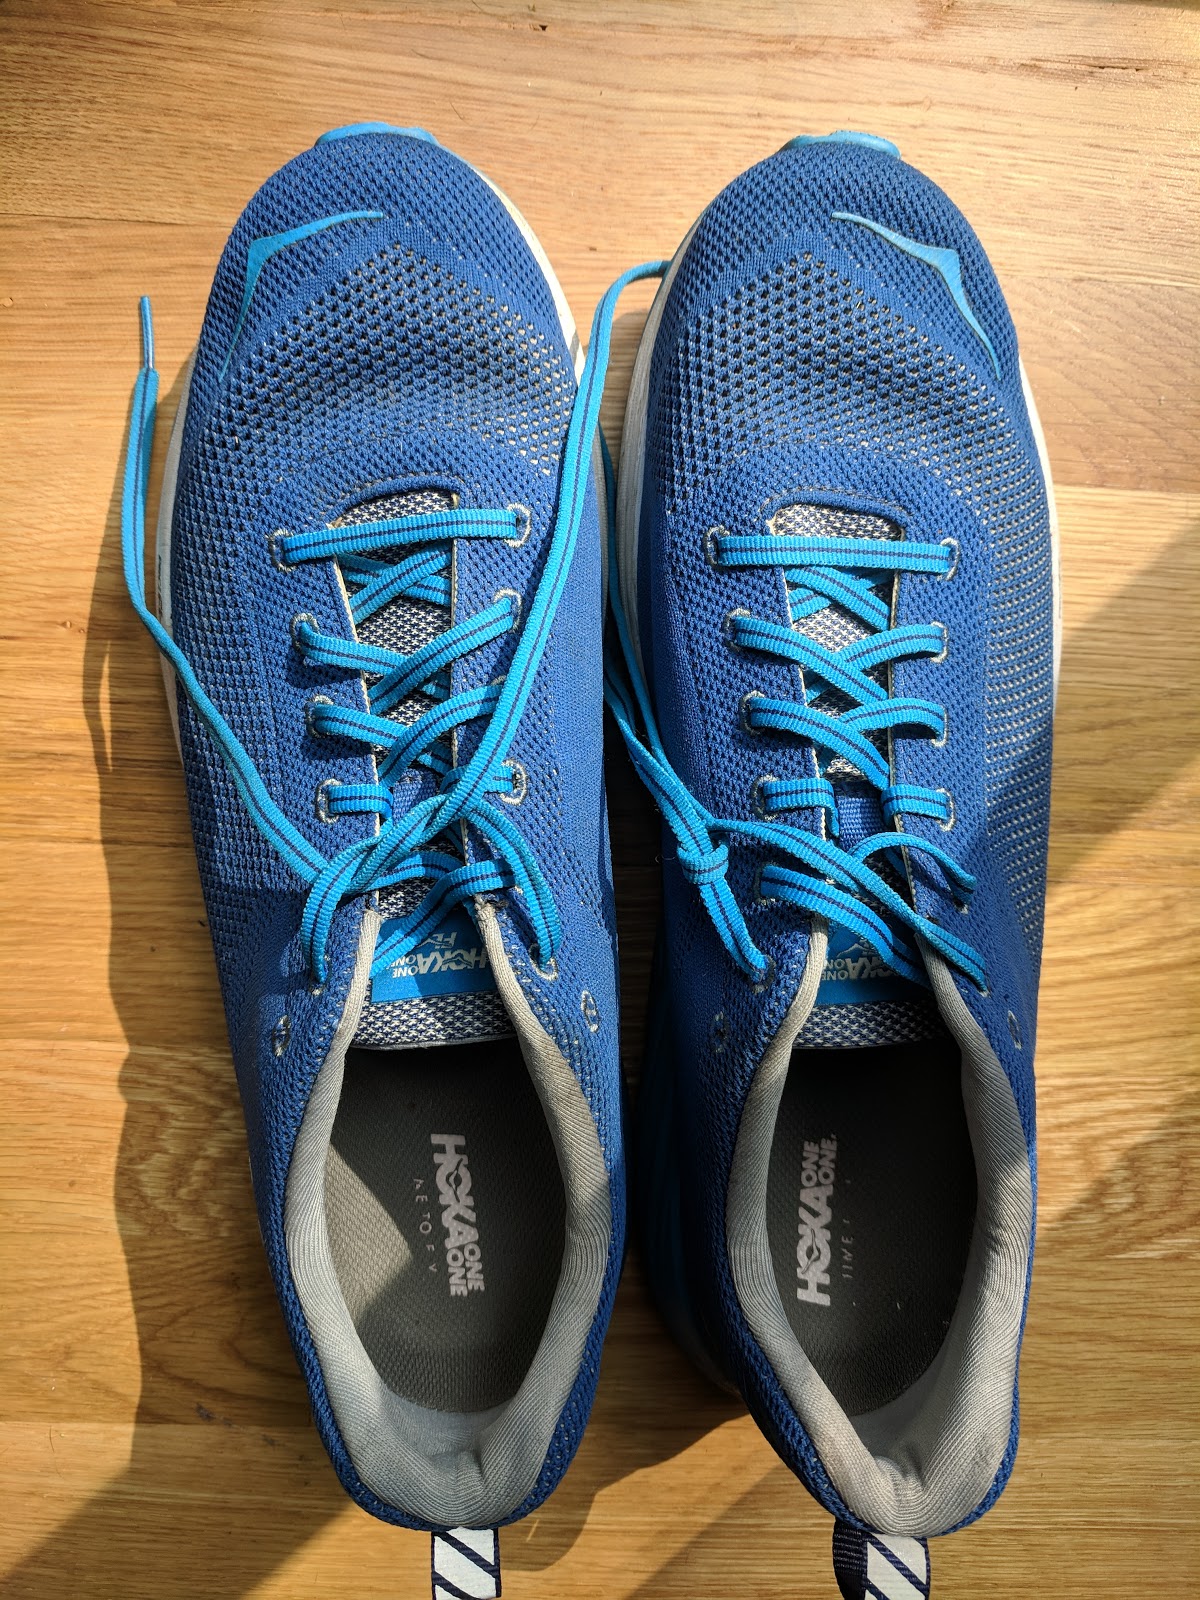 Midpack Gear: Hoka Mach review - initial and replacement shoes (blue ...